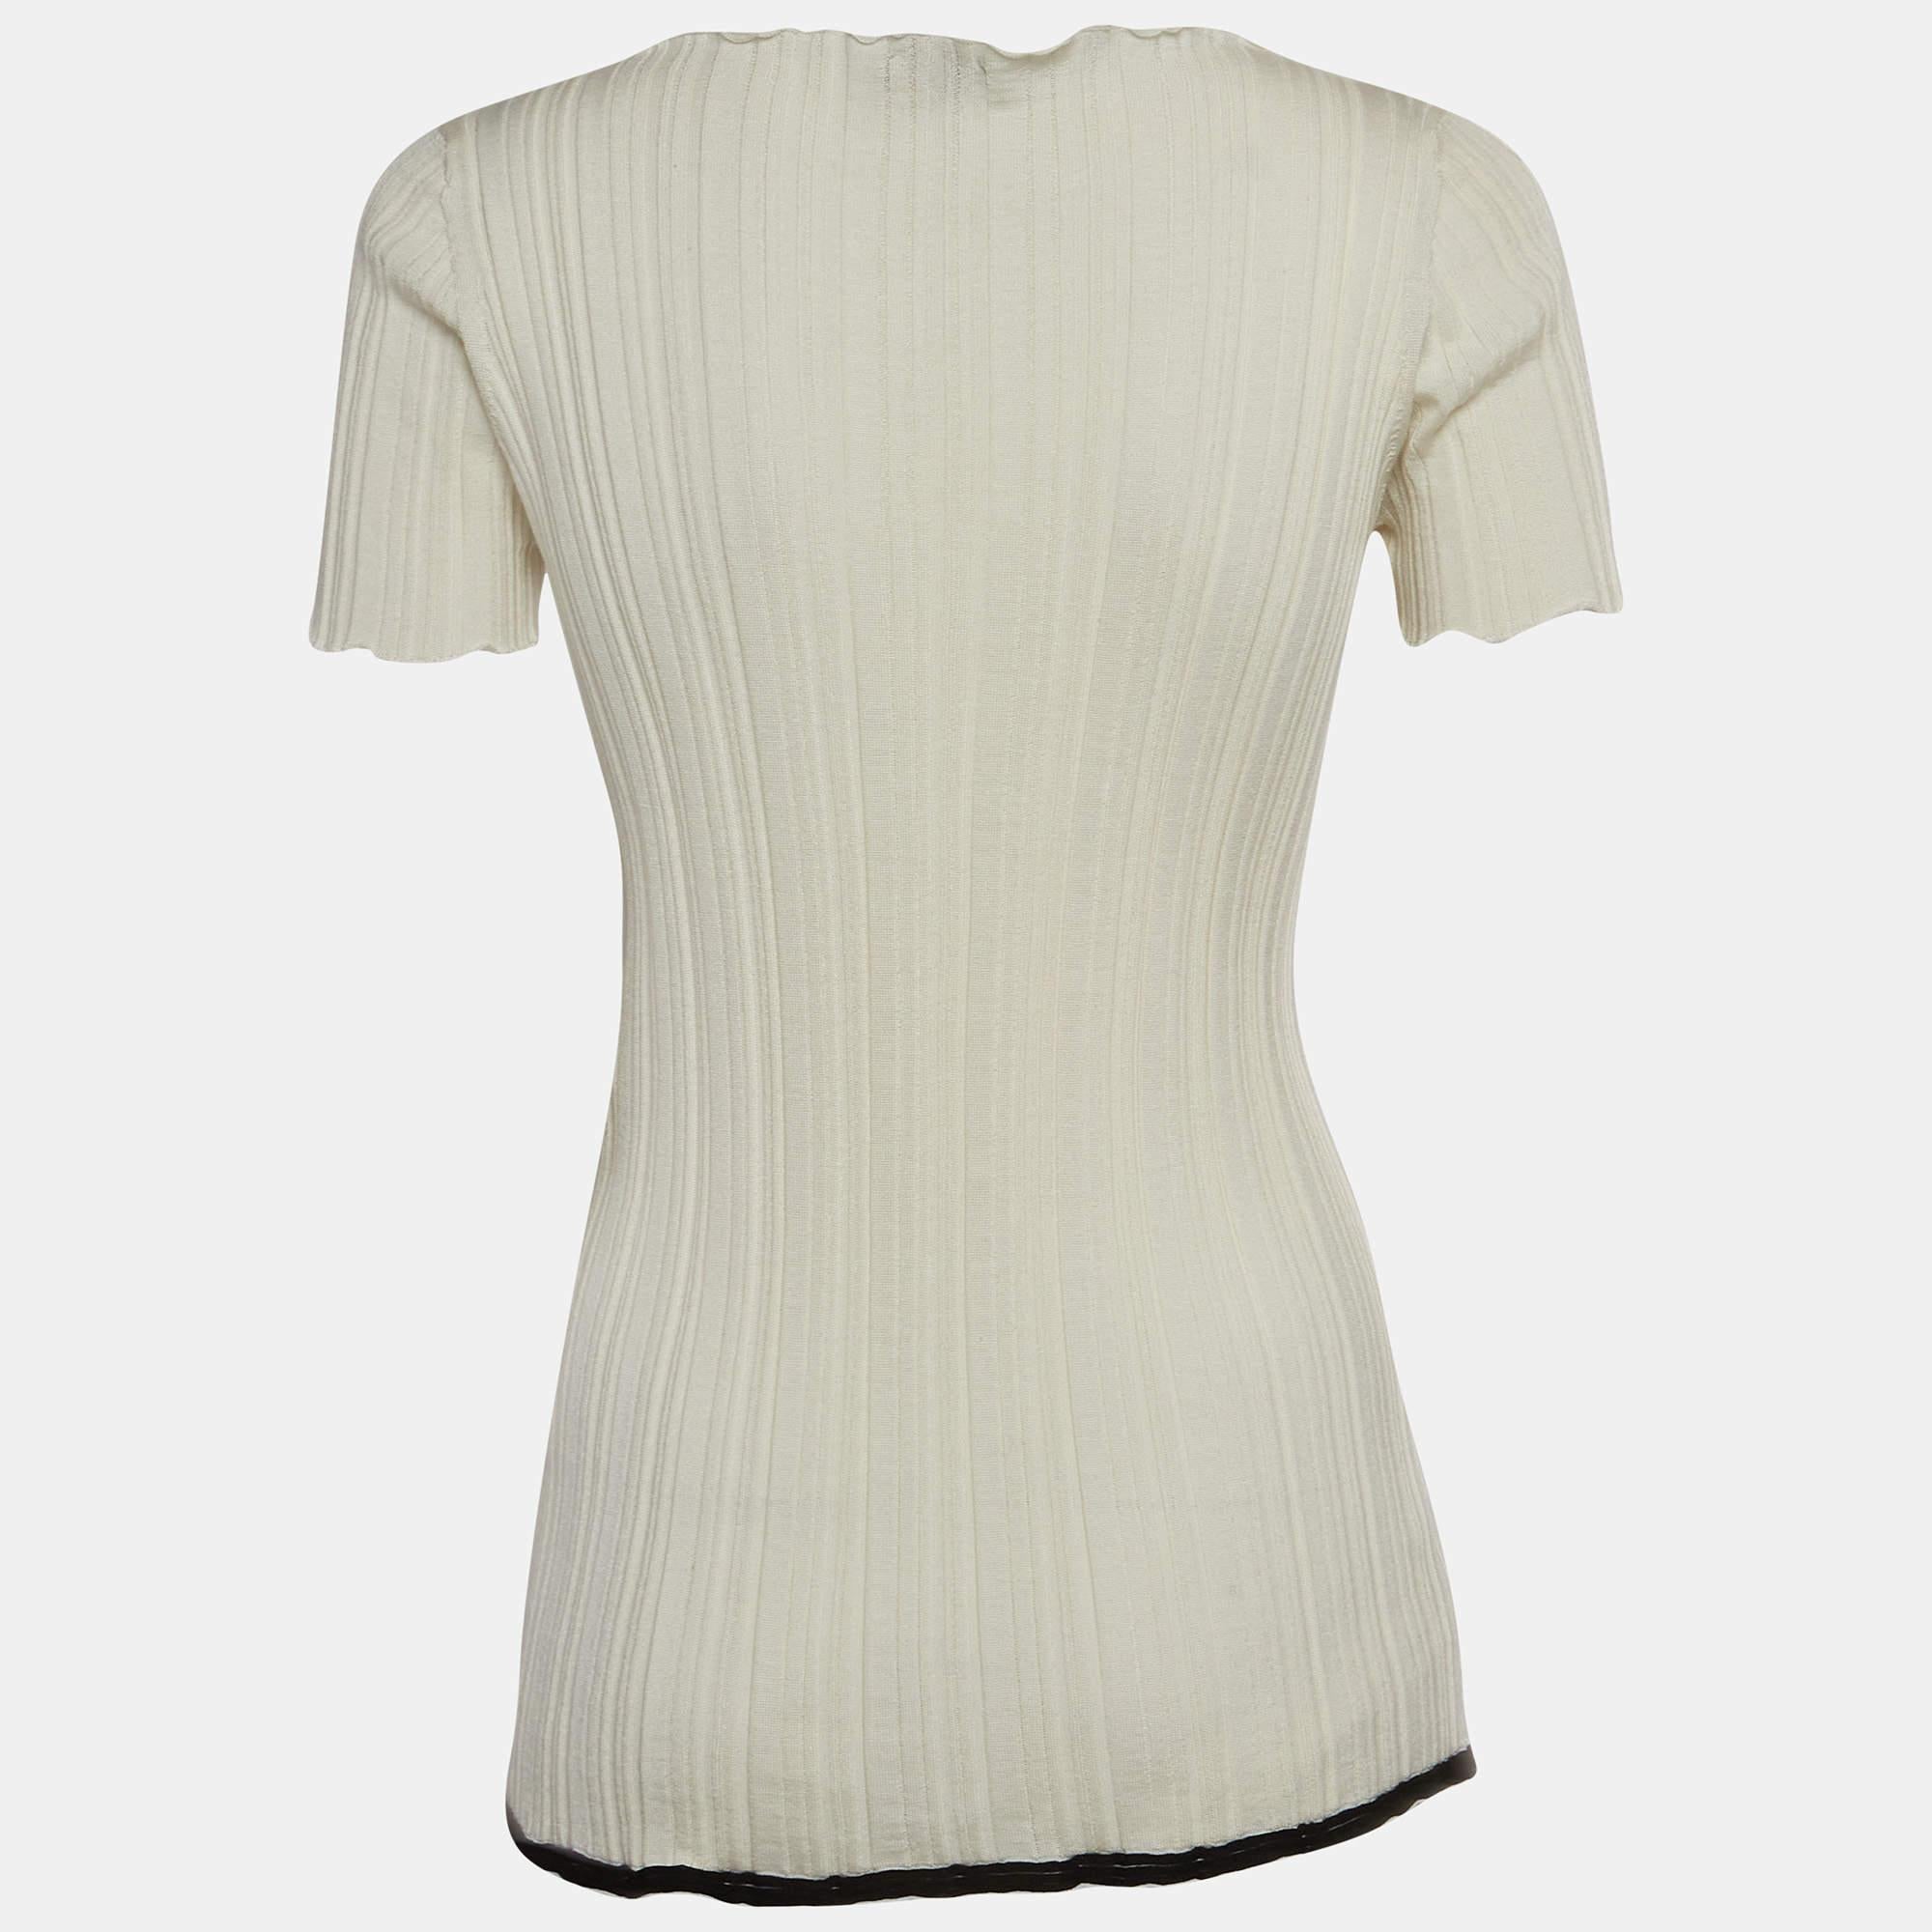 Careful tailoring, quality materials, and elegant cuts make this designer top a piece to cherish! It comes in a classic design to be easy to style.

